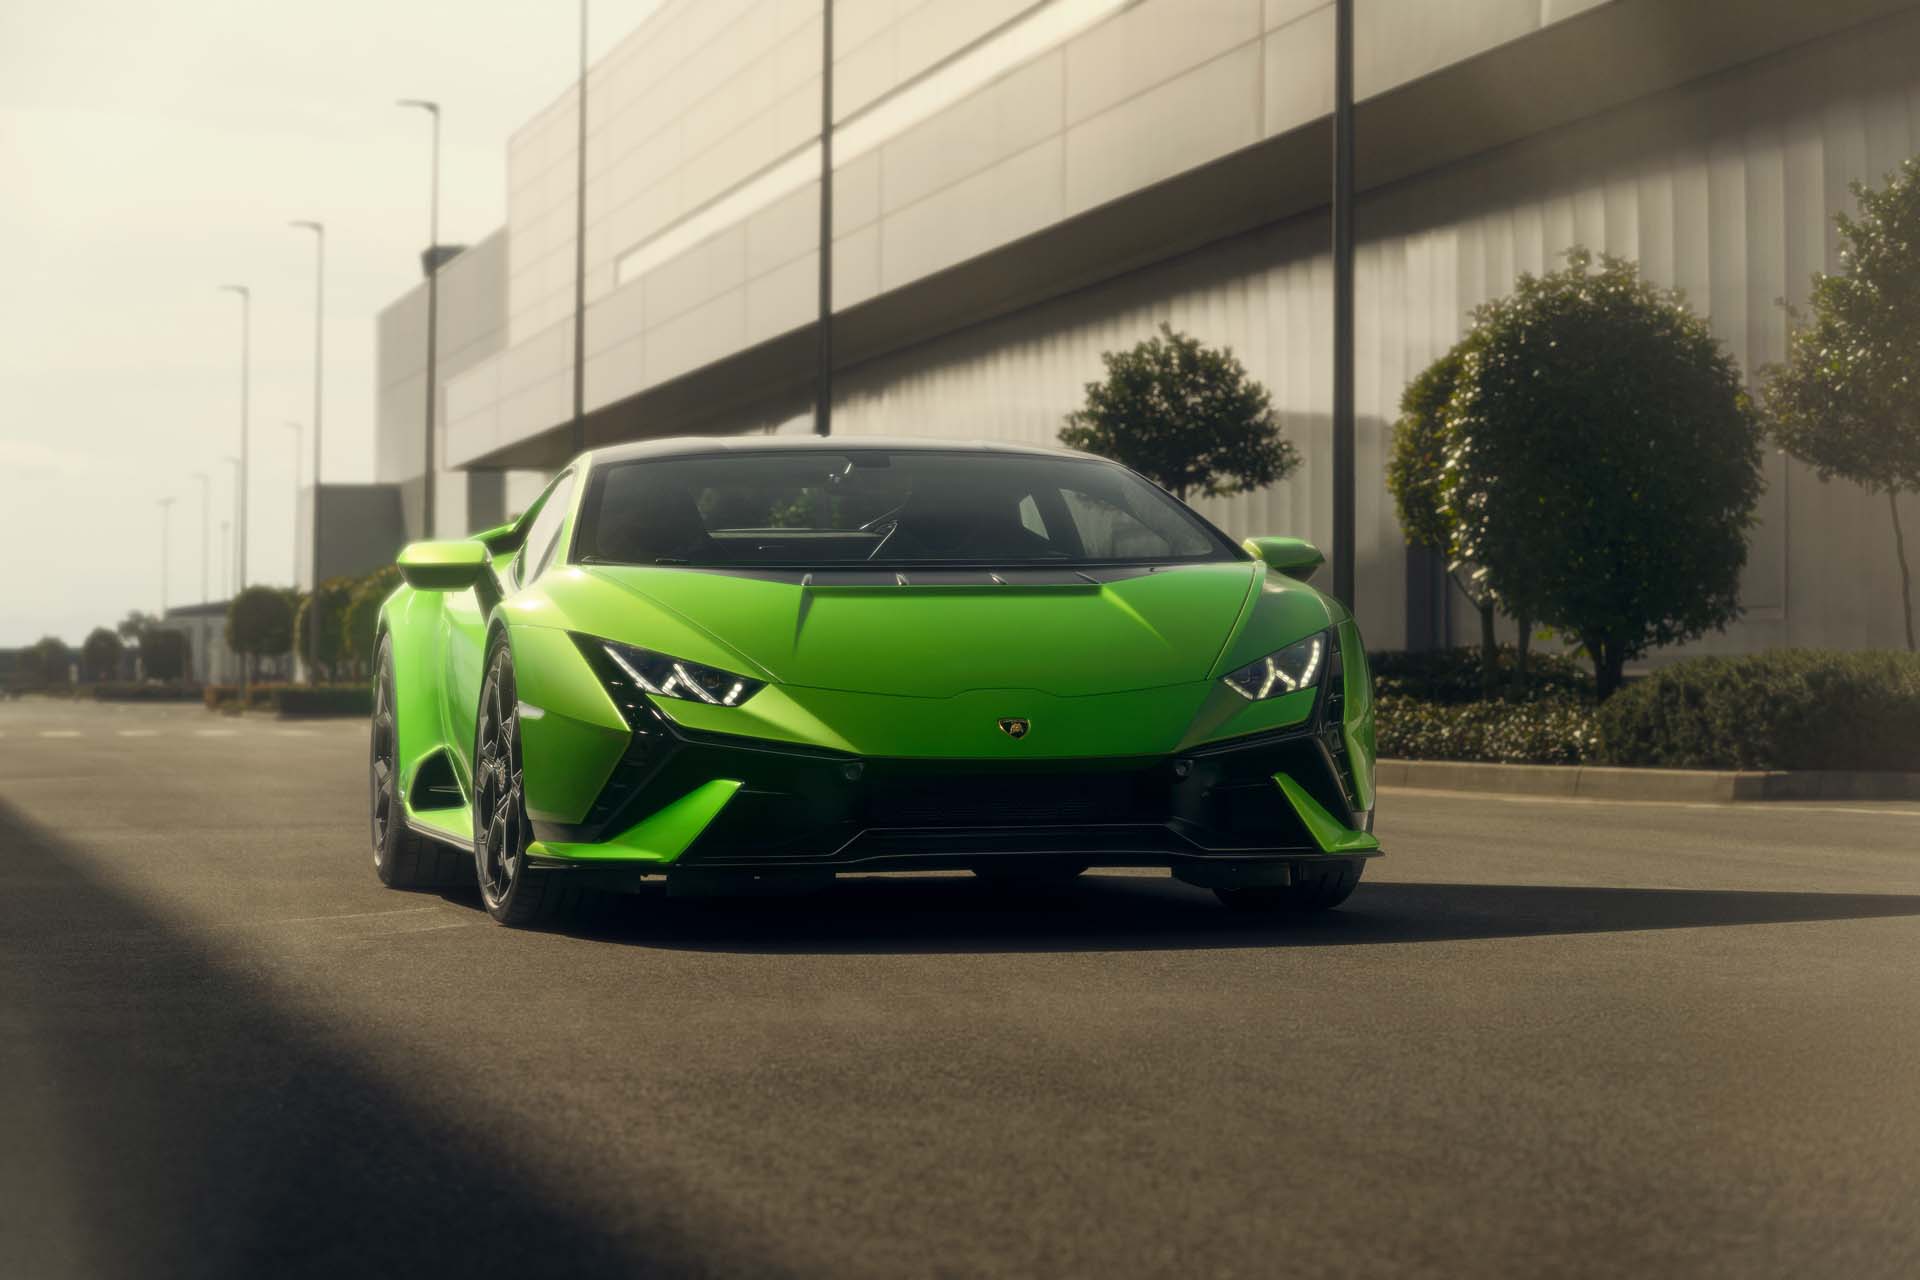 Preview: Lamborghini Huracan Tecnica combines power and poise